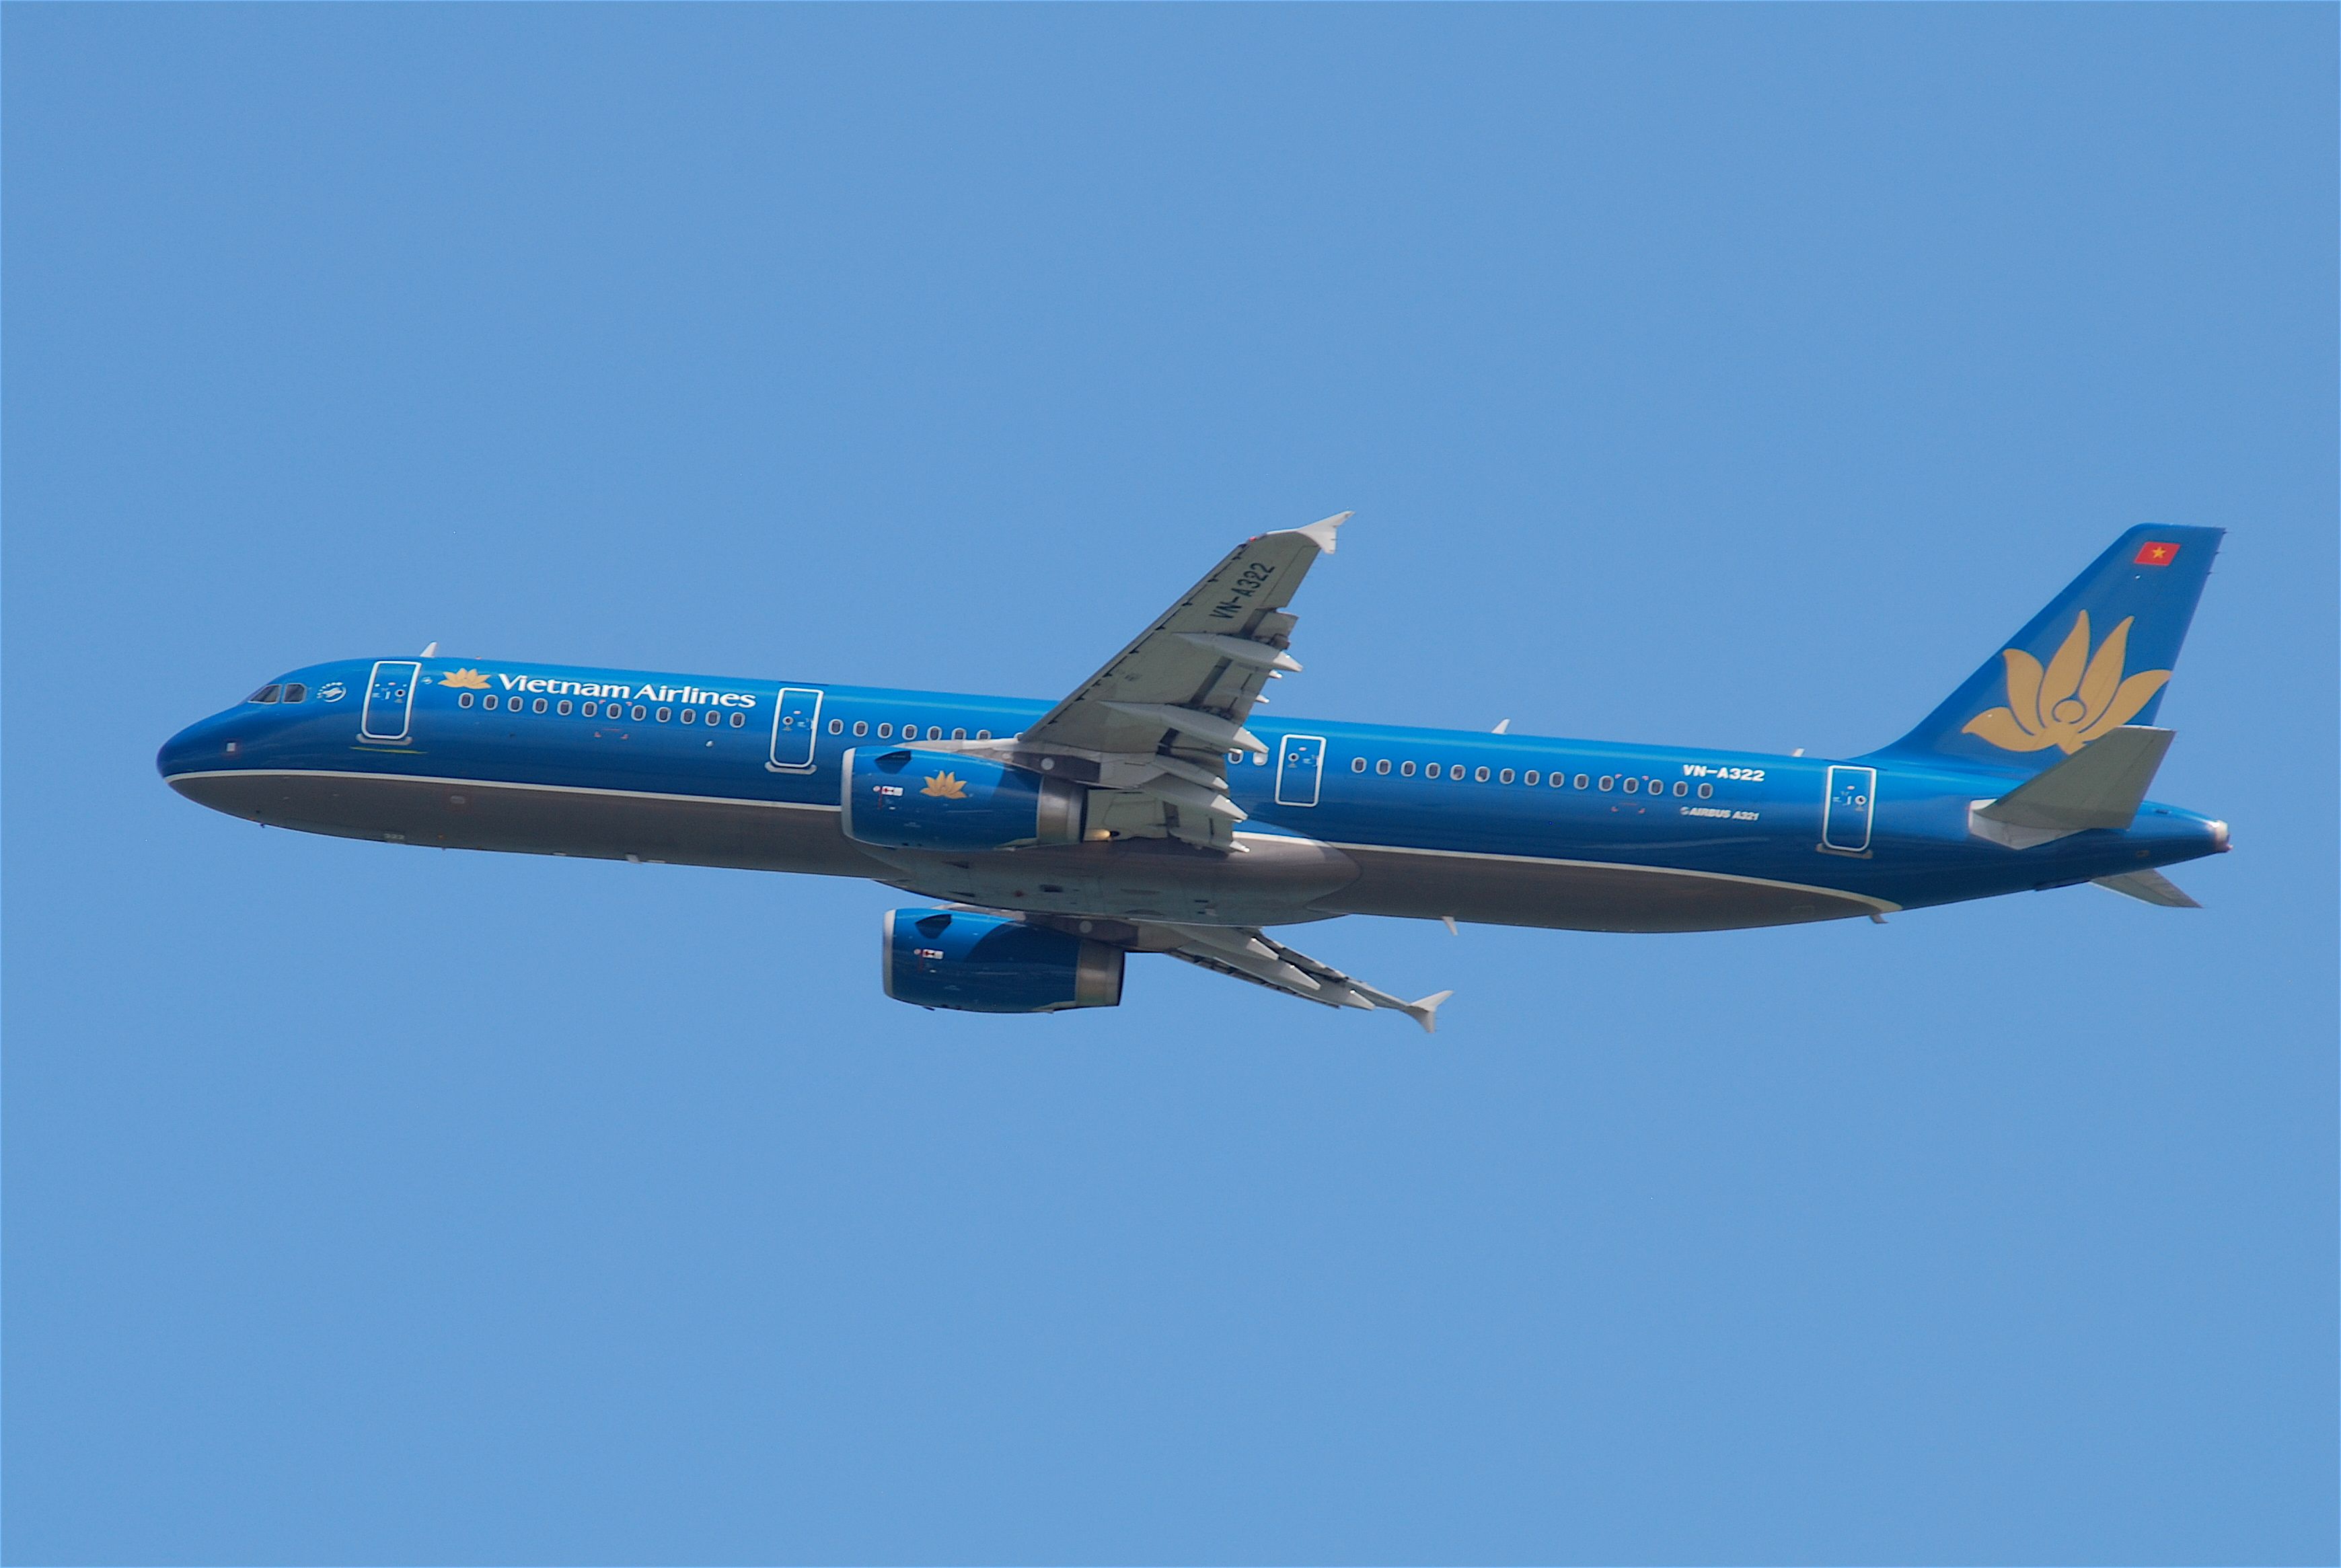 Vietnam Airlines Airbus A321neo